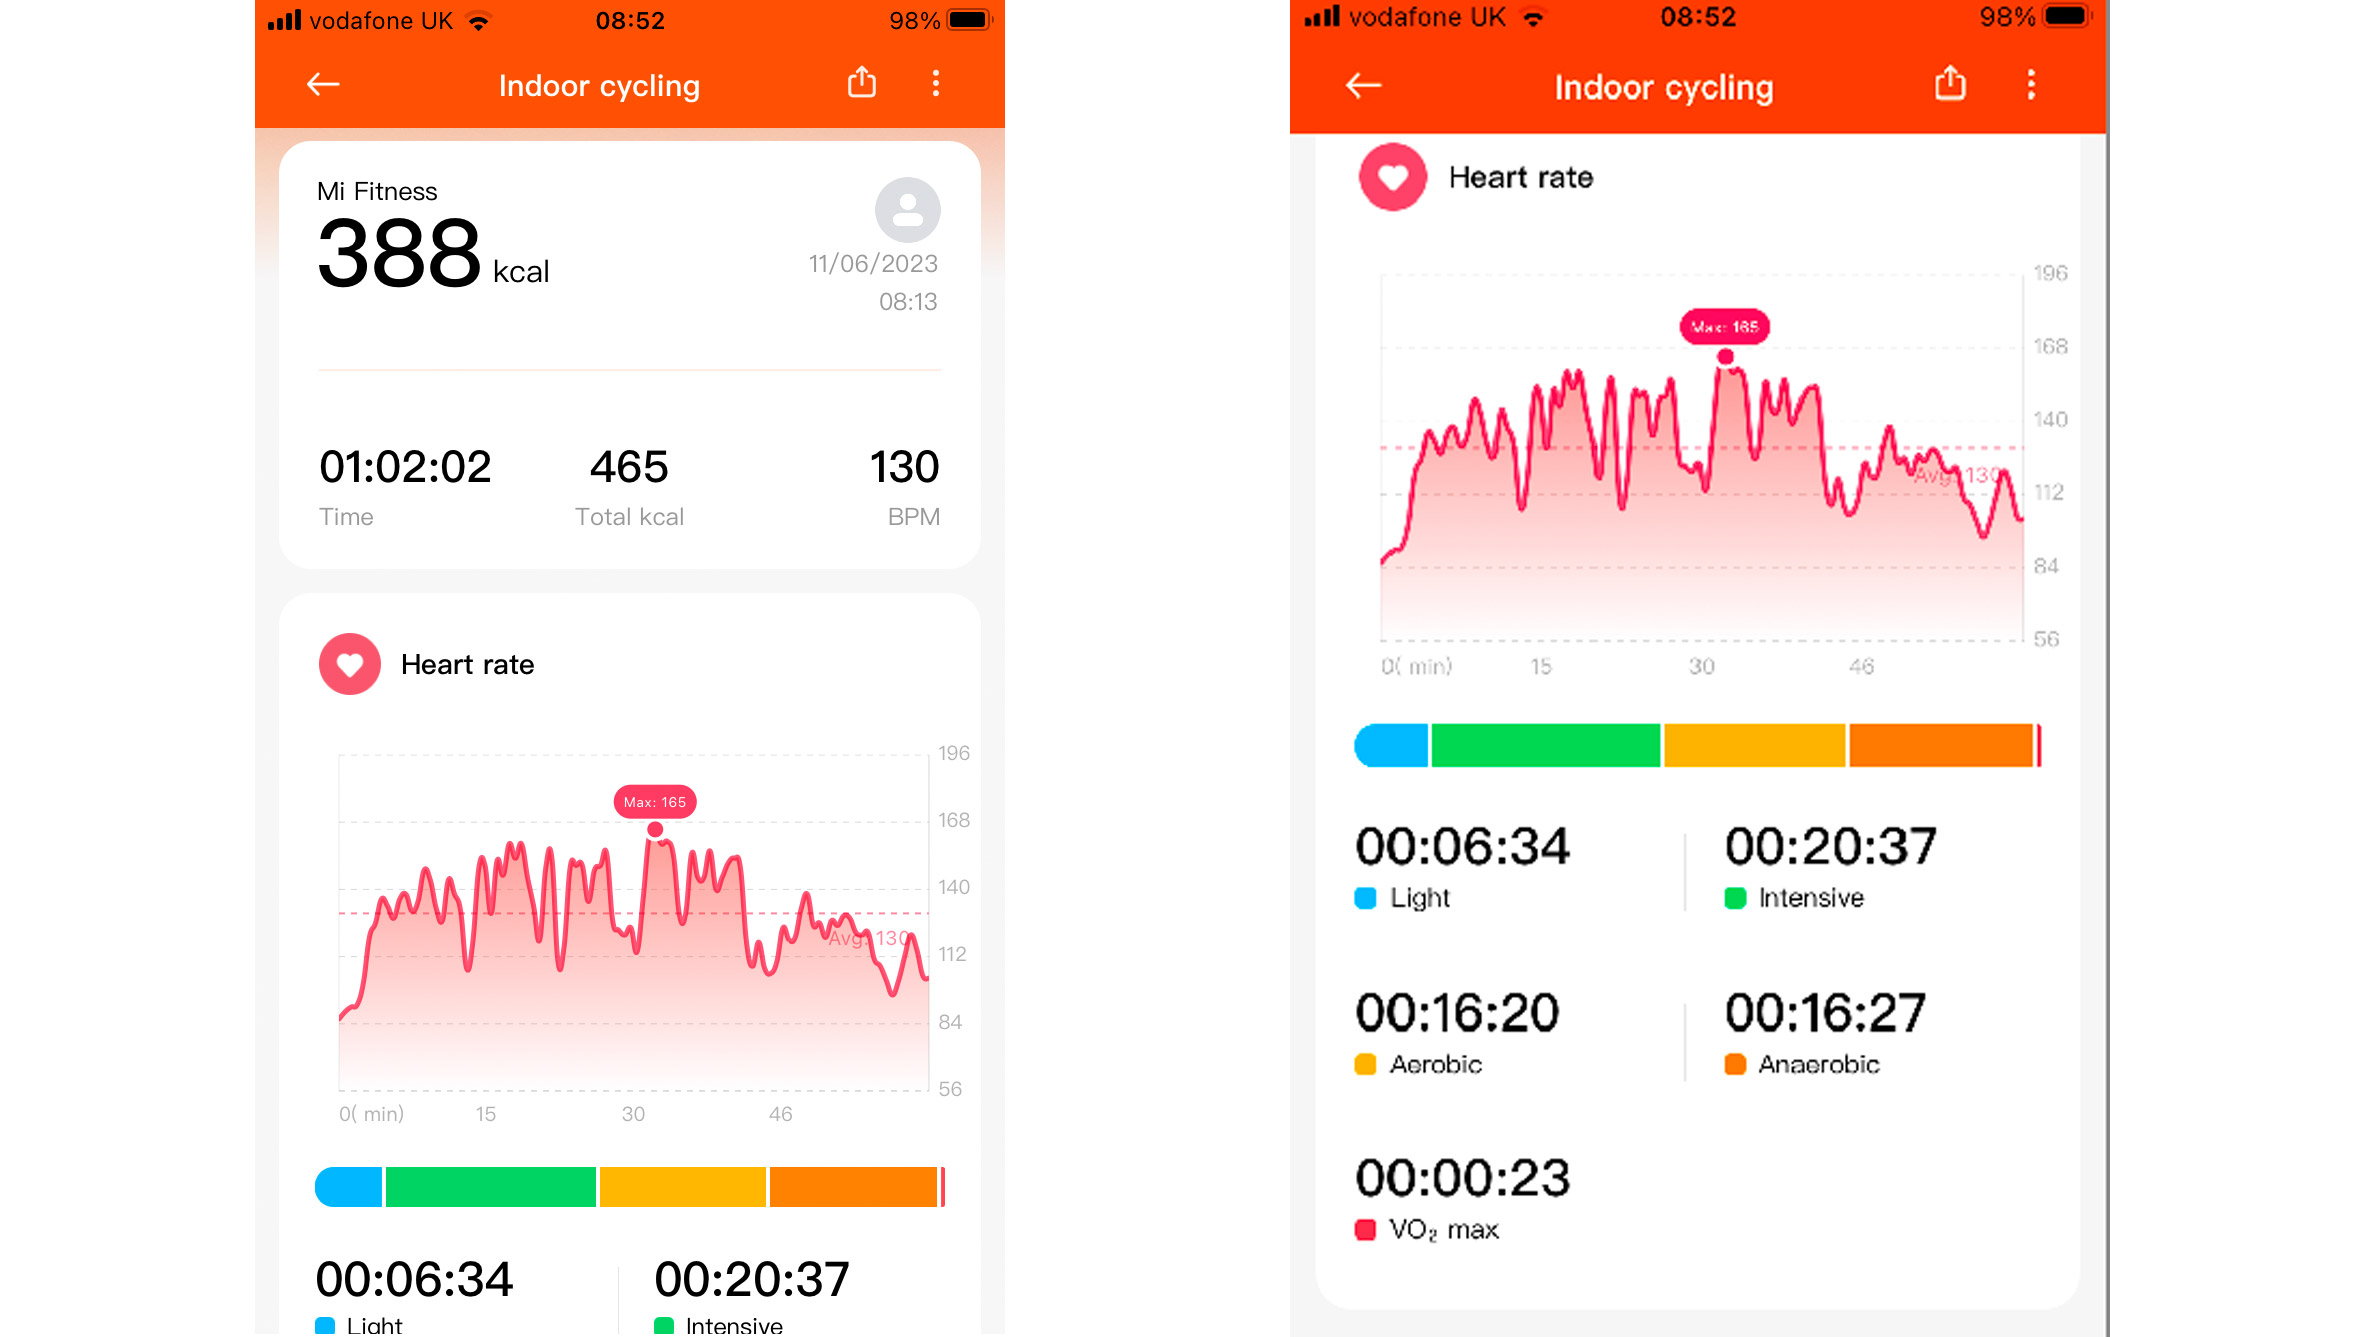 Mi Fitness app showing workout mode